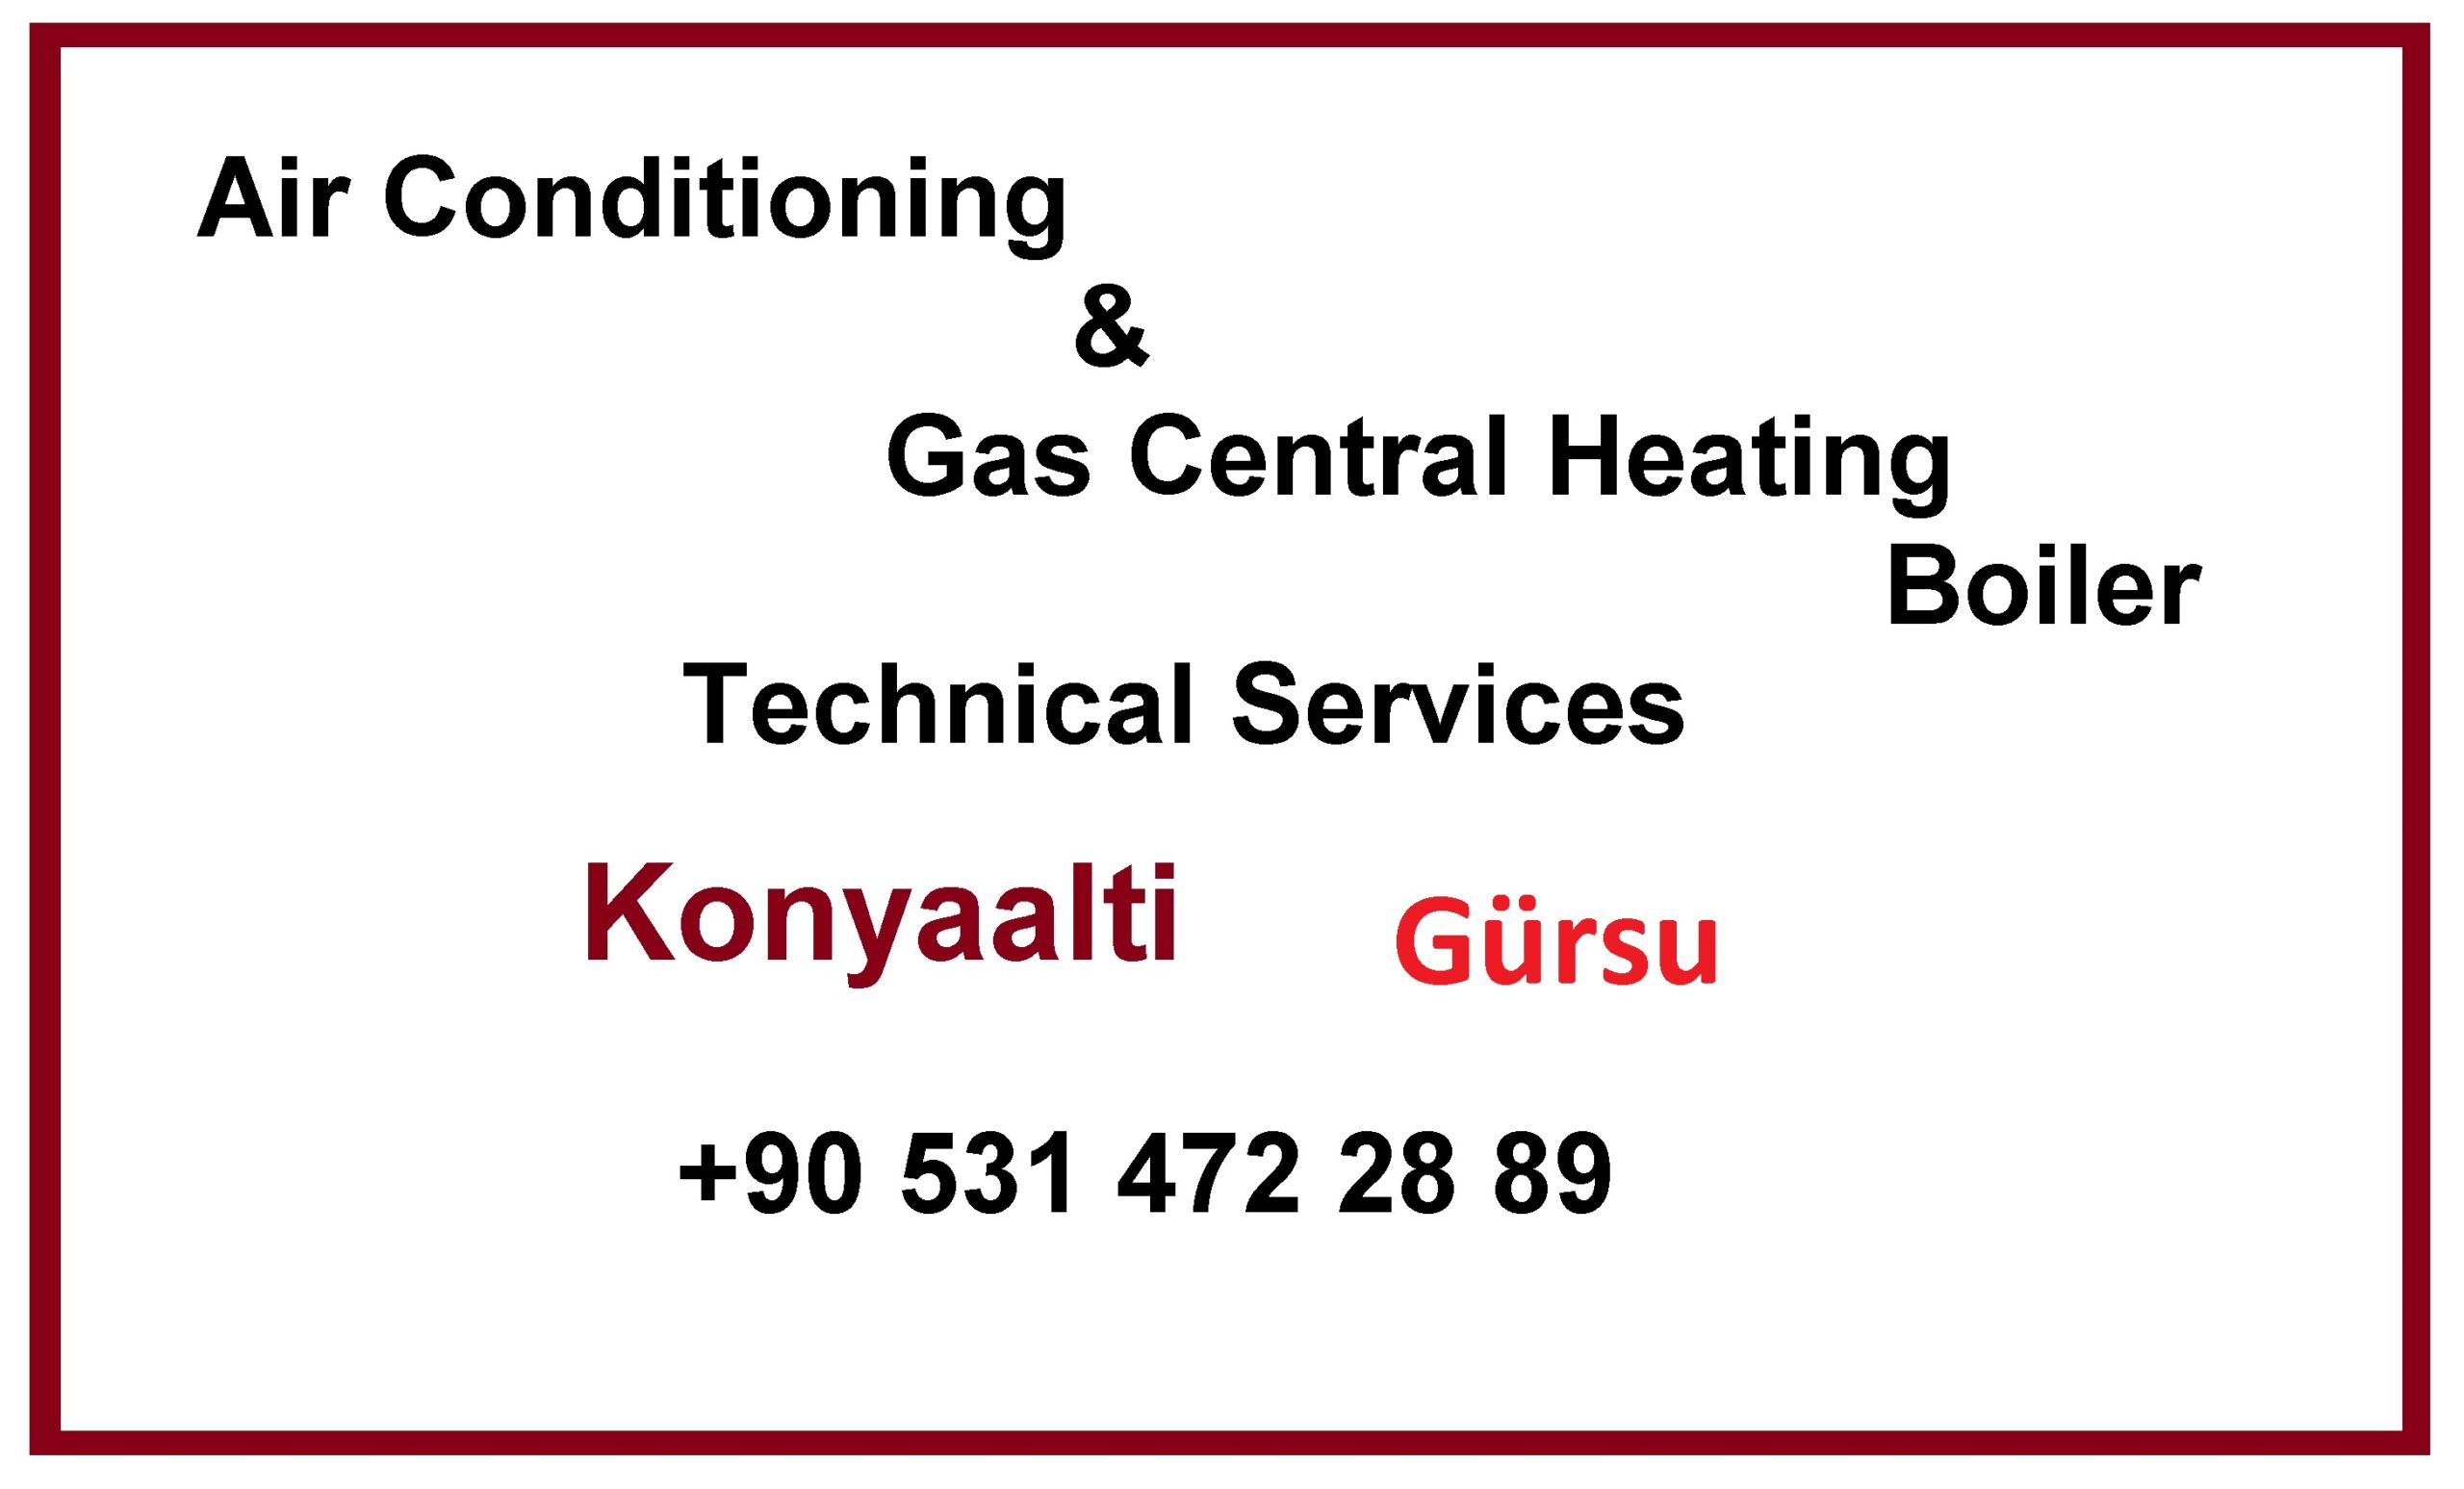 Air Conditioning, Gas Central Heating TS in Gürsu